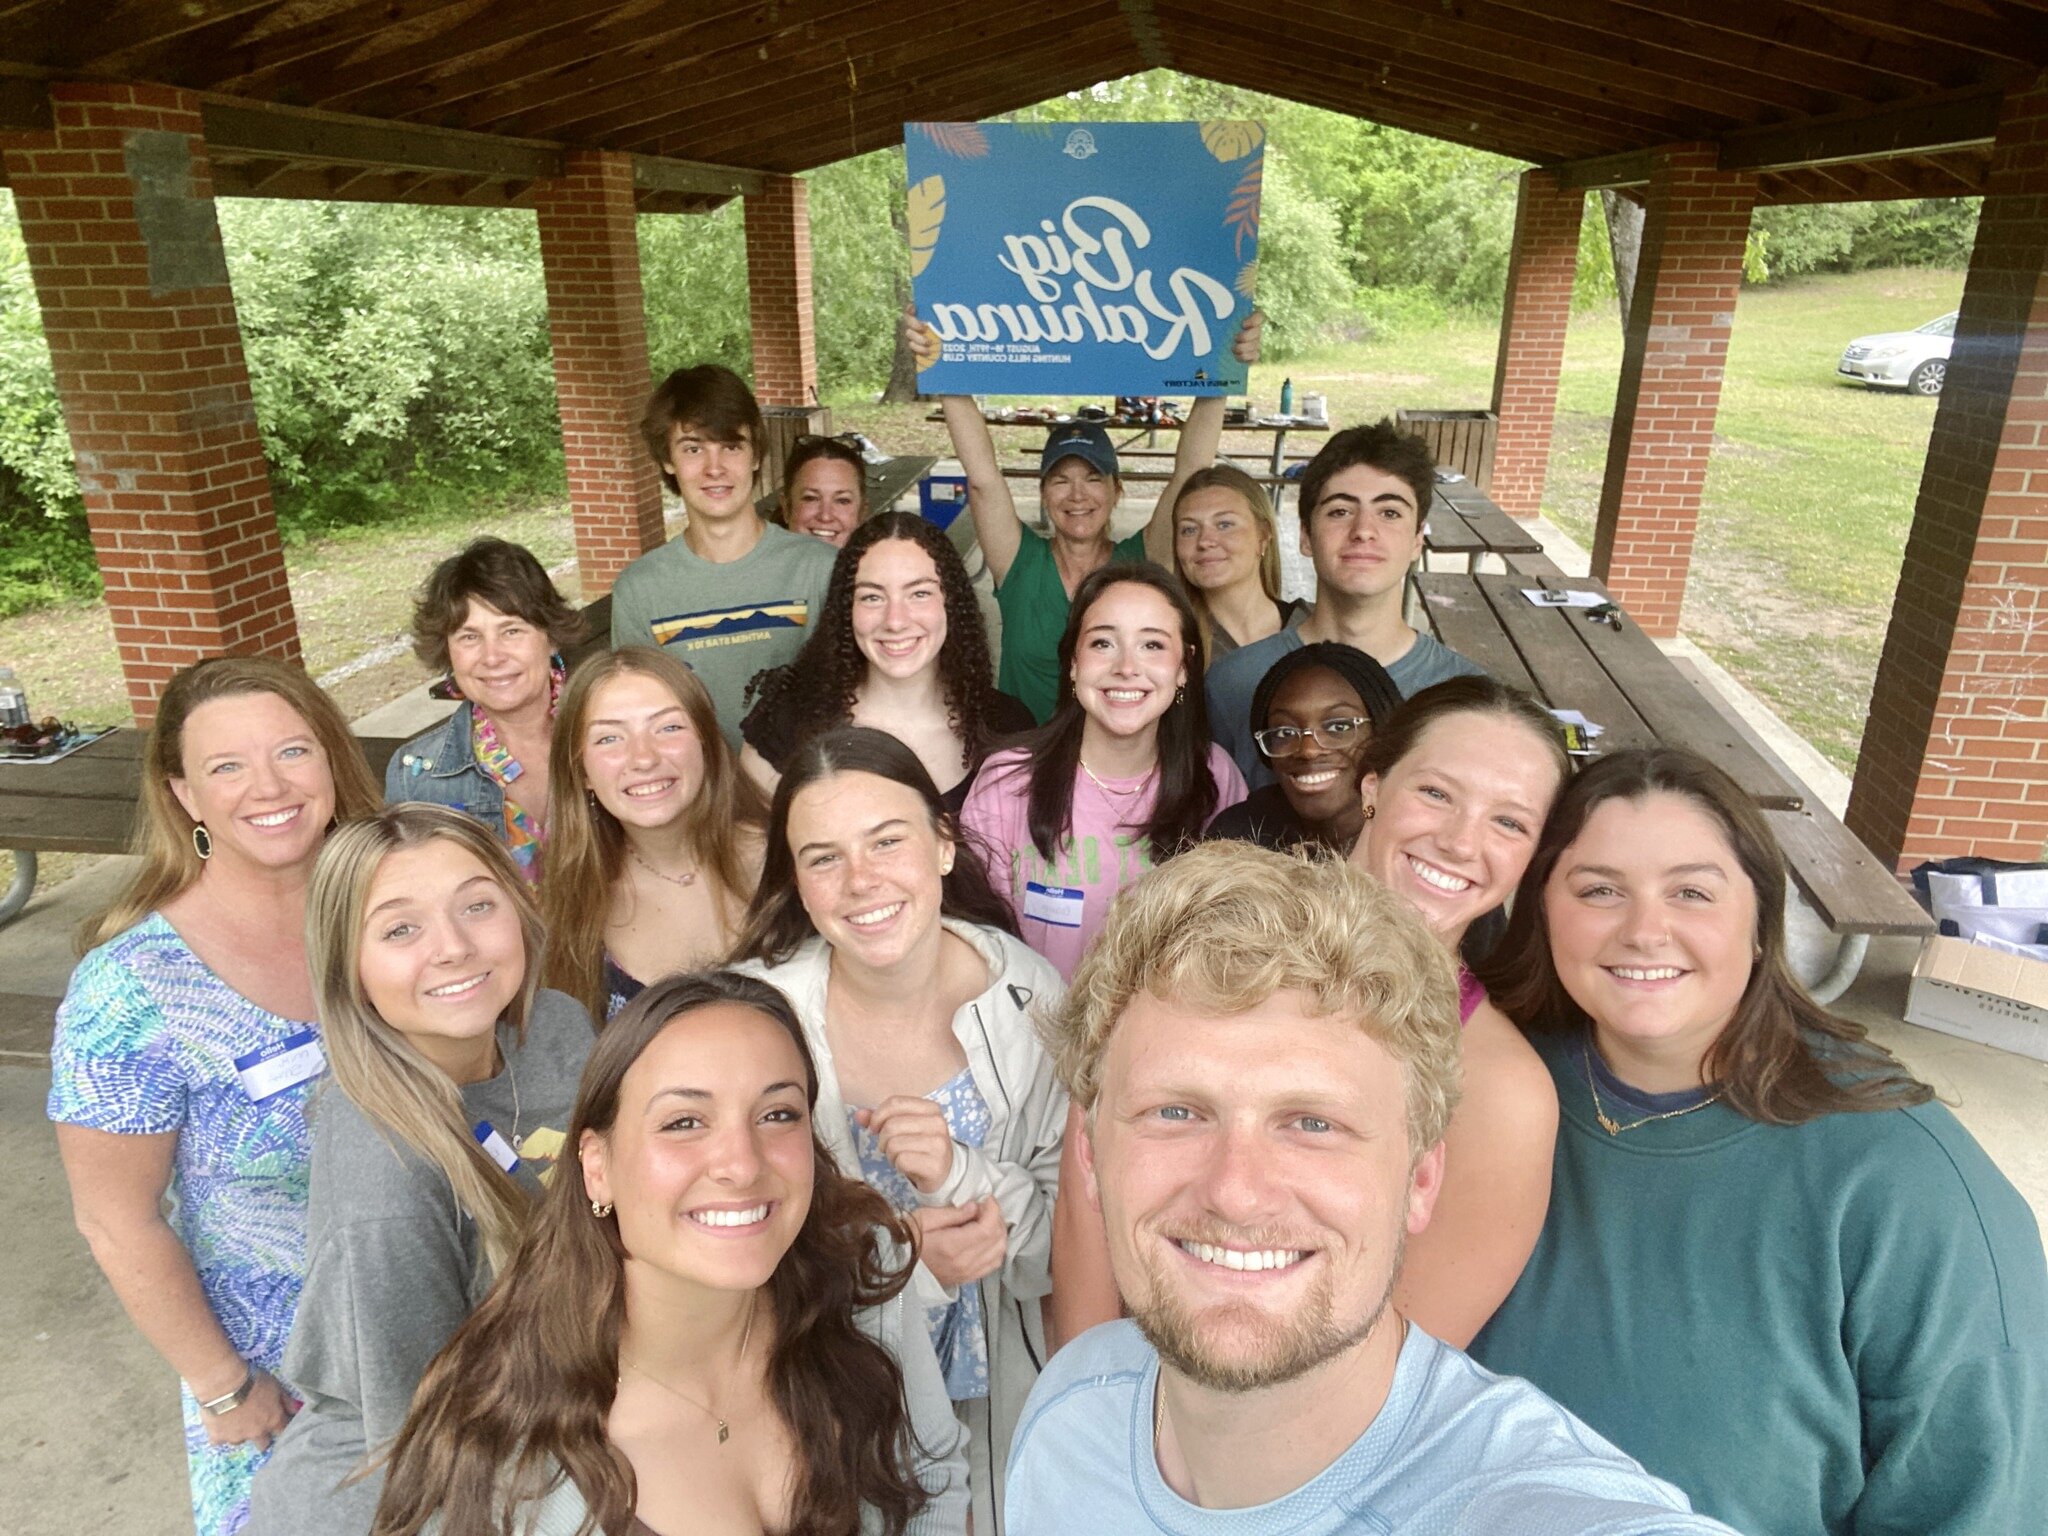 Yesterday some of our Staff, Board and Teen Ambassadors gathered together to celebrate our Big Kahuna being voted &quot;BEST LOCAL CHARITY EVENT!&quot; 

We played games, shared laughs and got to take care of our mental health! 💪